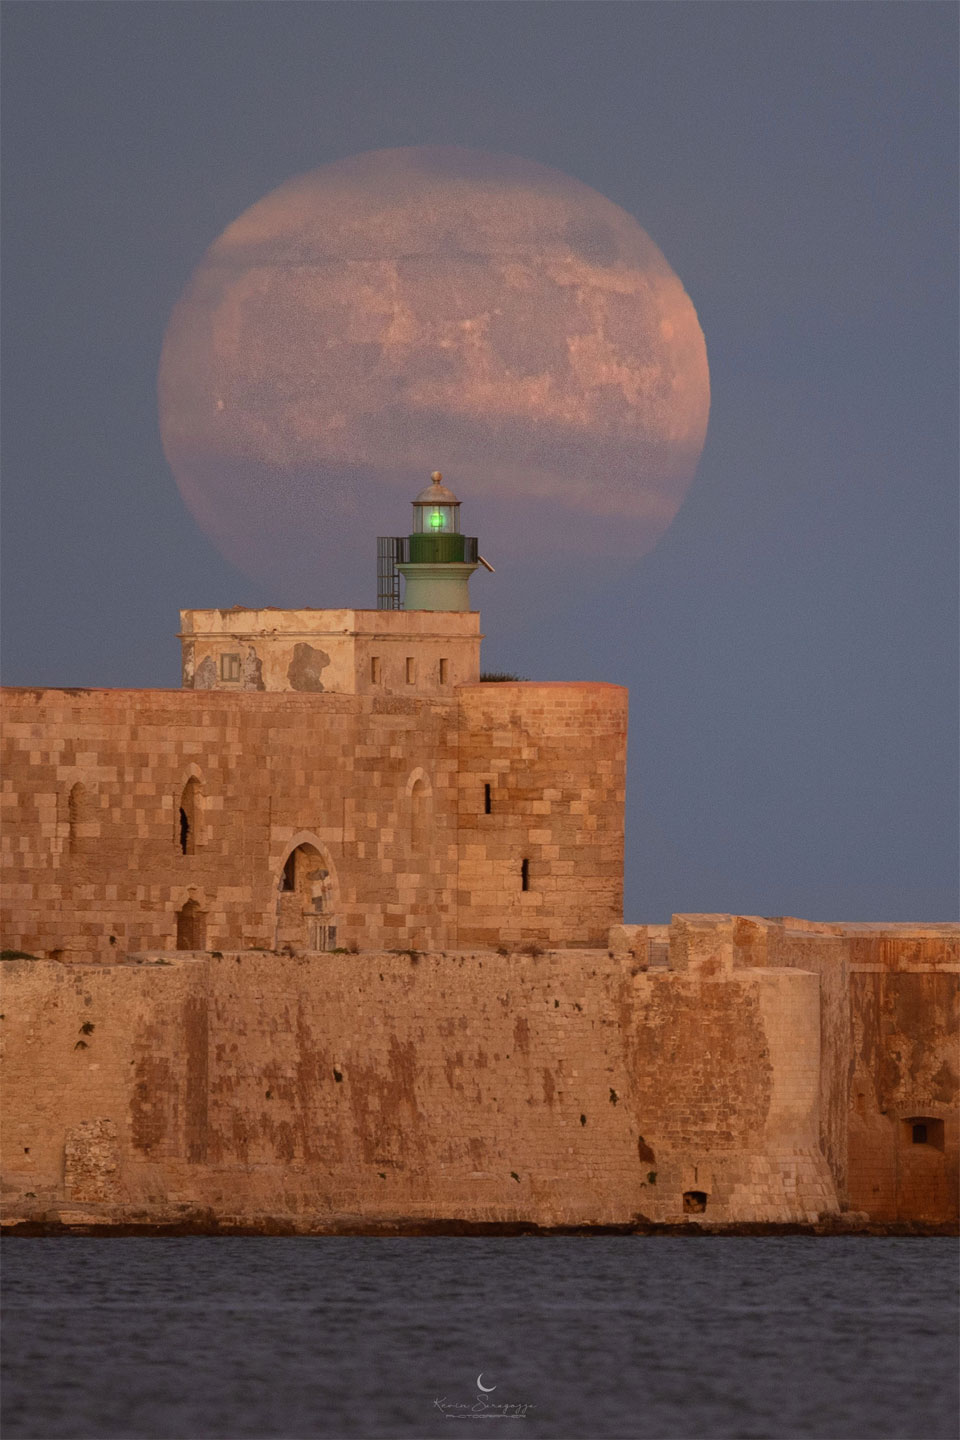 A large Moon is seen behind a historic stone structure. 
Please see the explanation for more detailed information.